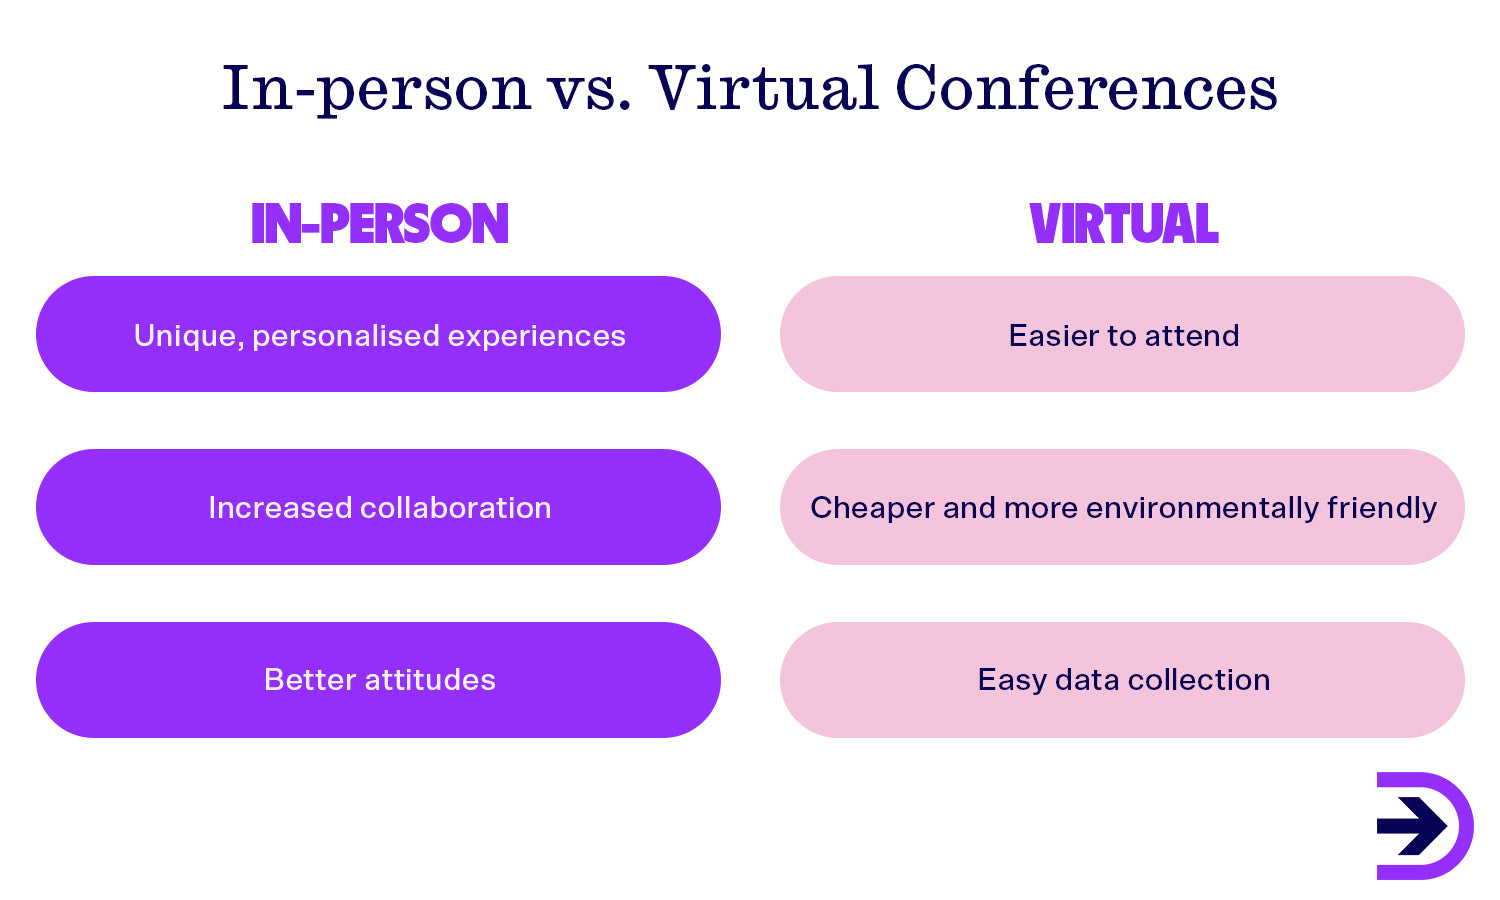 Virtual conferences have become more common since the Covid-19 crisis and is a way to supplement the conference experience from anywhere in the world.